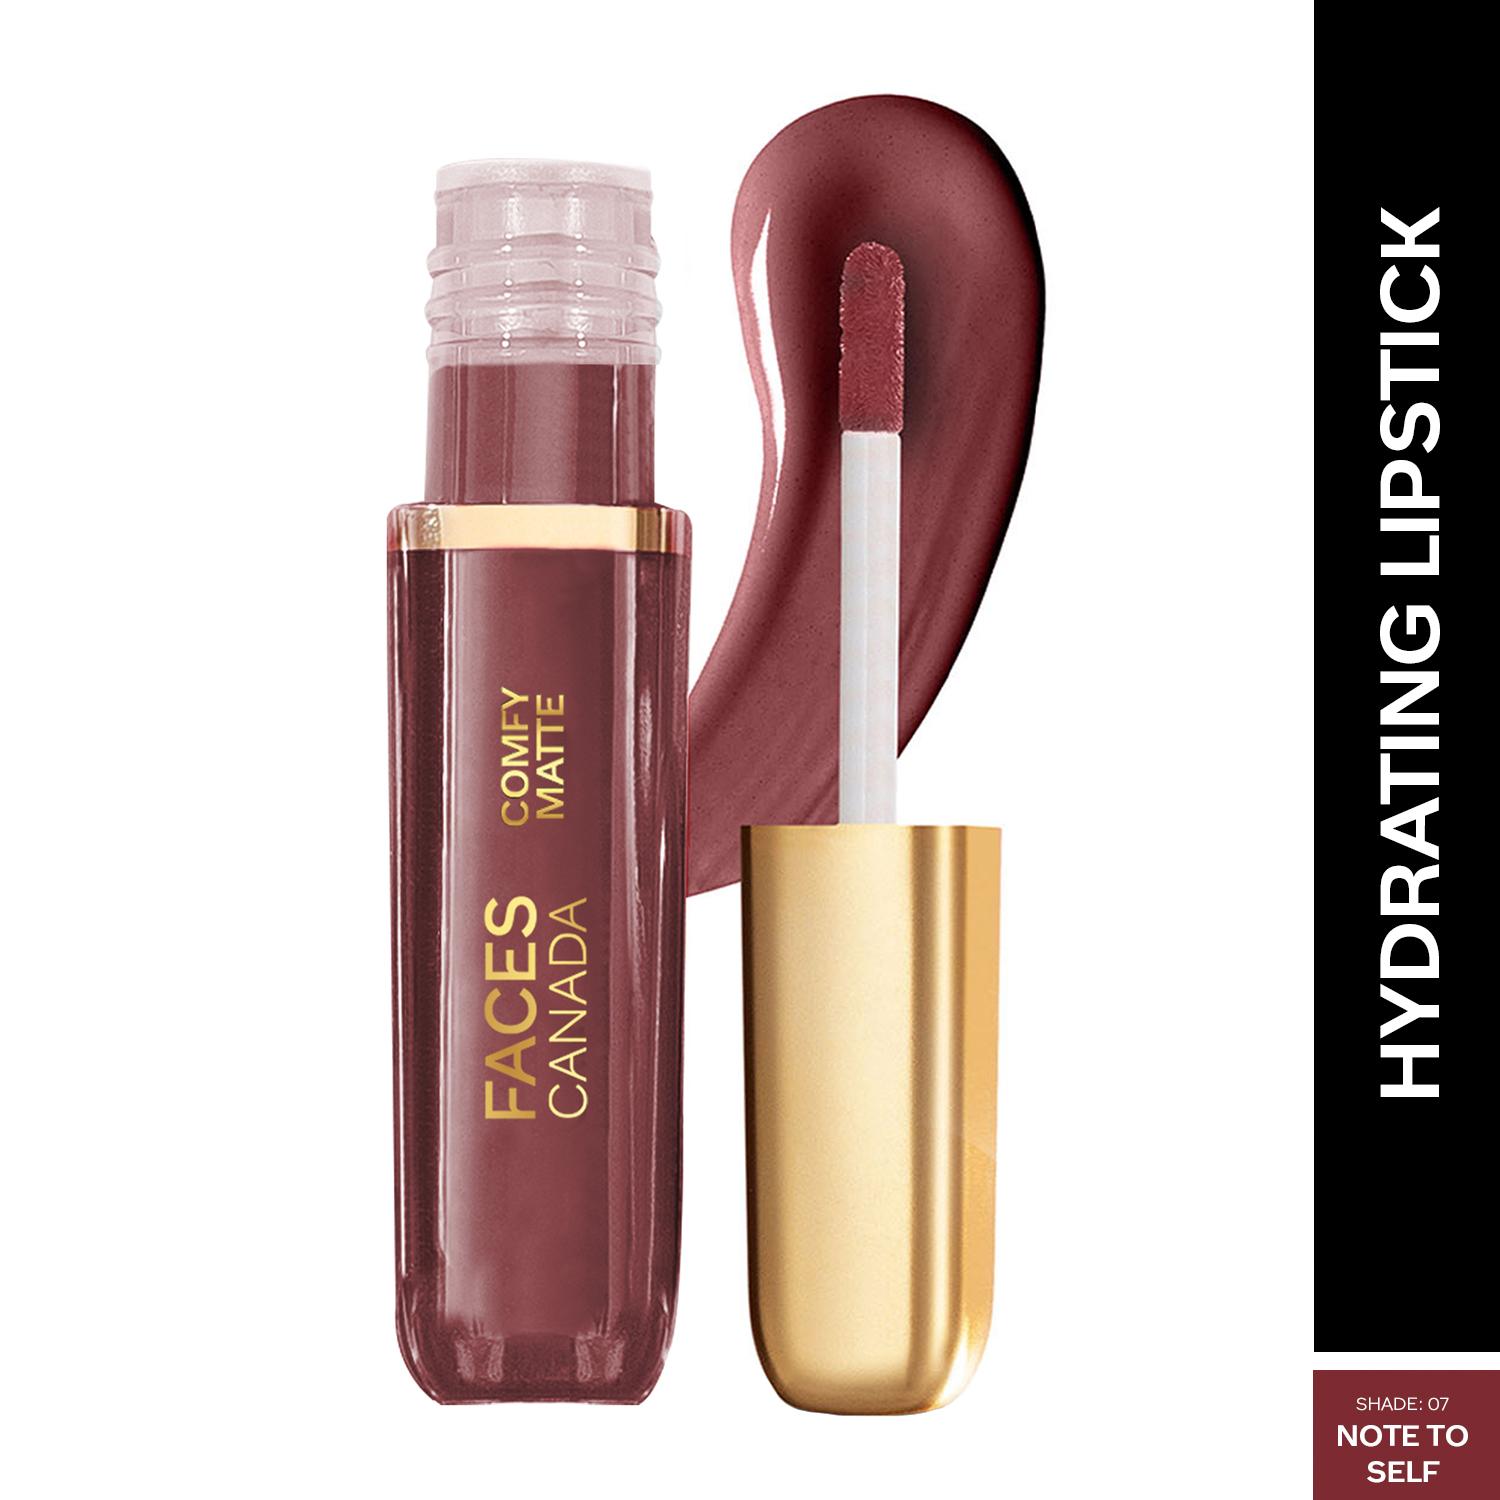 Faces Canada Comfy Matte Liquid Lipstick, 10HR Stay, No Dryness - Note To Self 07 (3 ml)